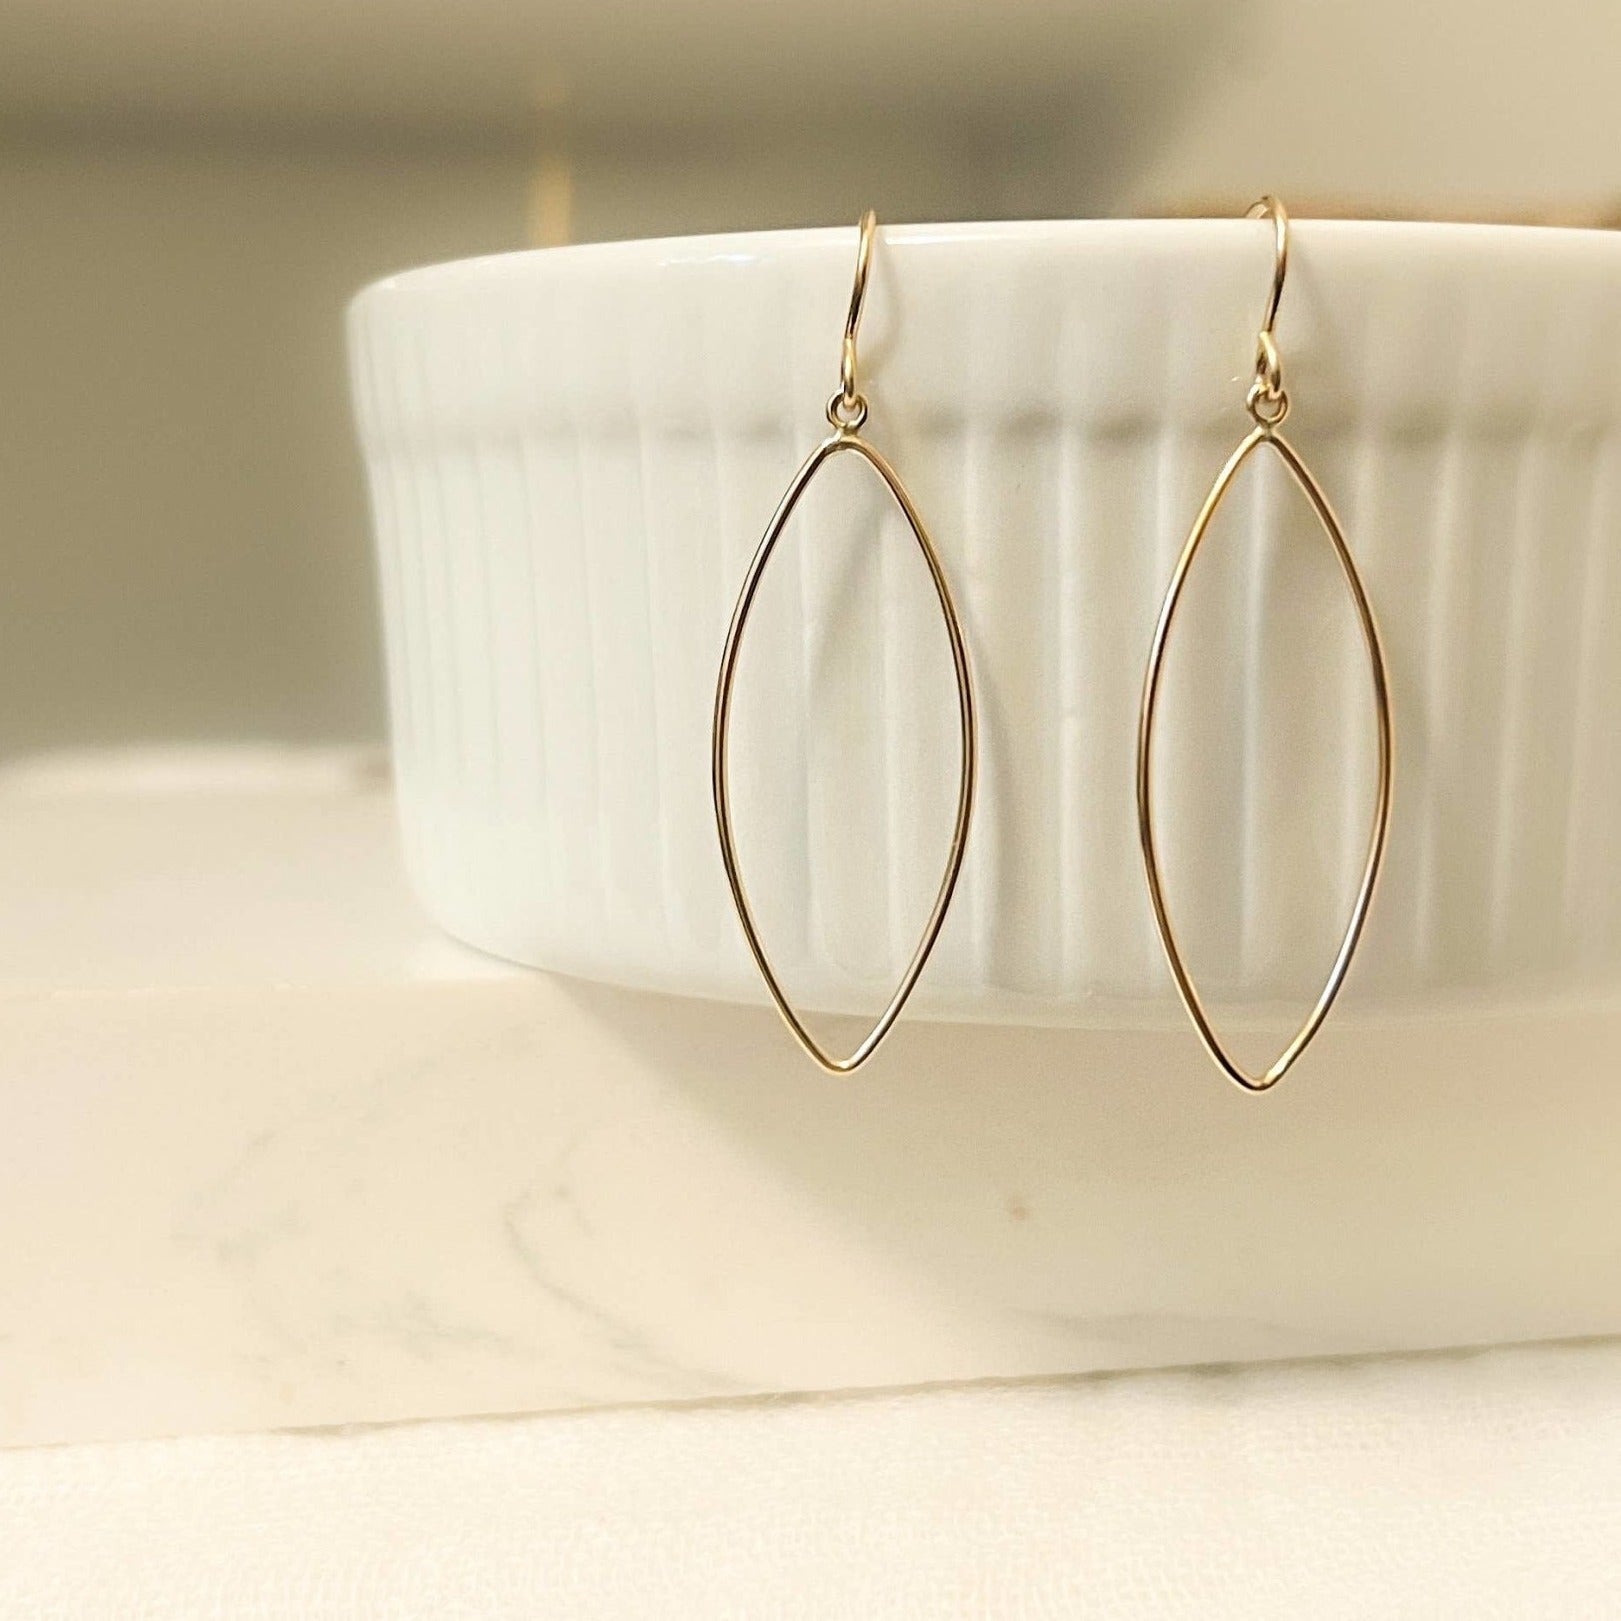 Smooth or Hammered Marquise Earrings- 14k Gold Filled - Sela+Sage - Dangle Earrings